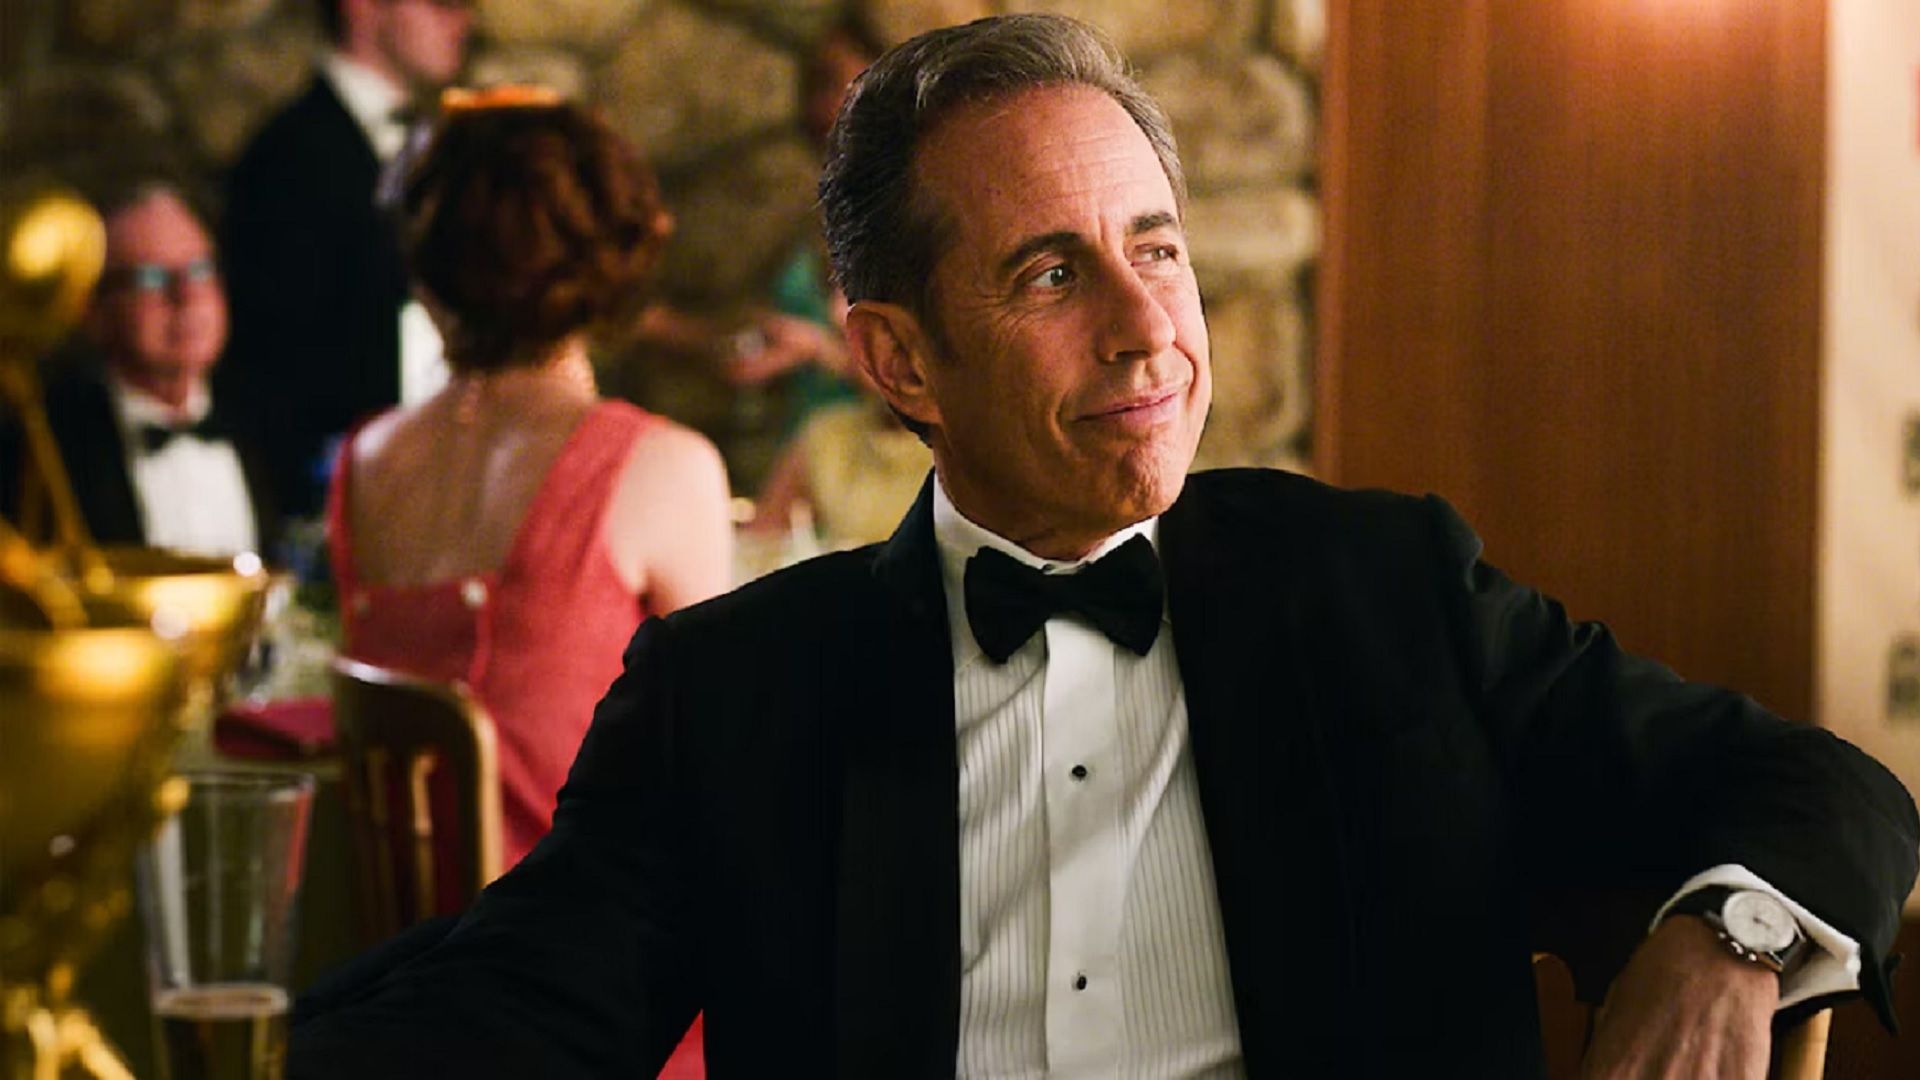 Jerry Seinfeld sitting at a table in tuxedo and bow tie